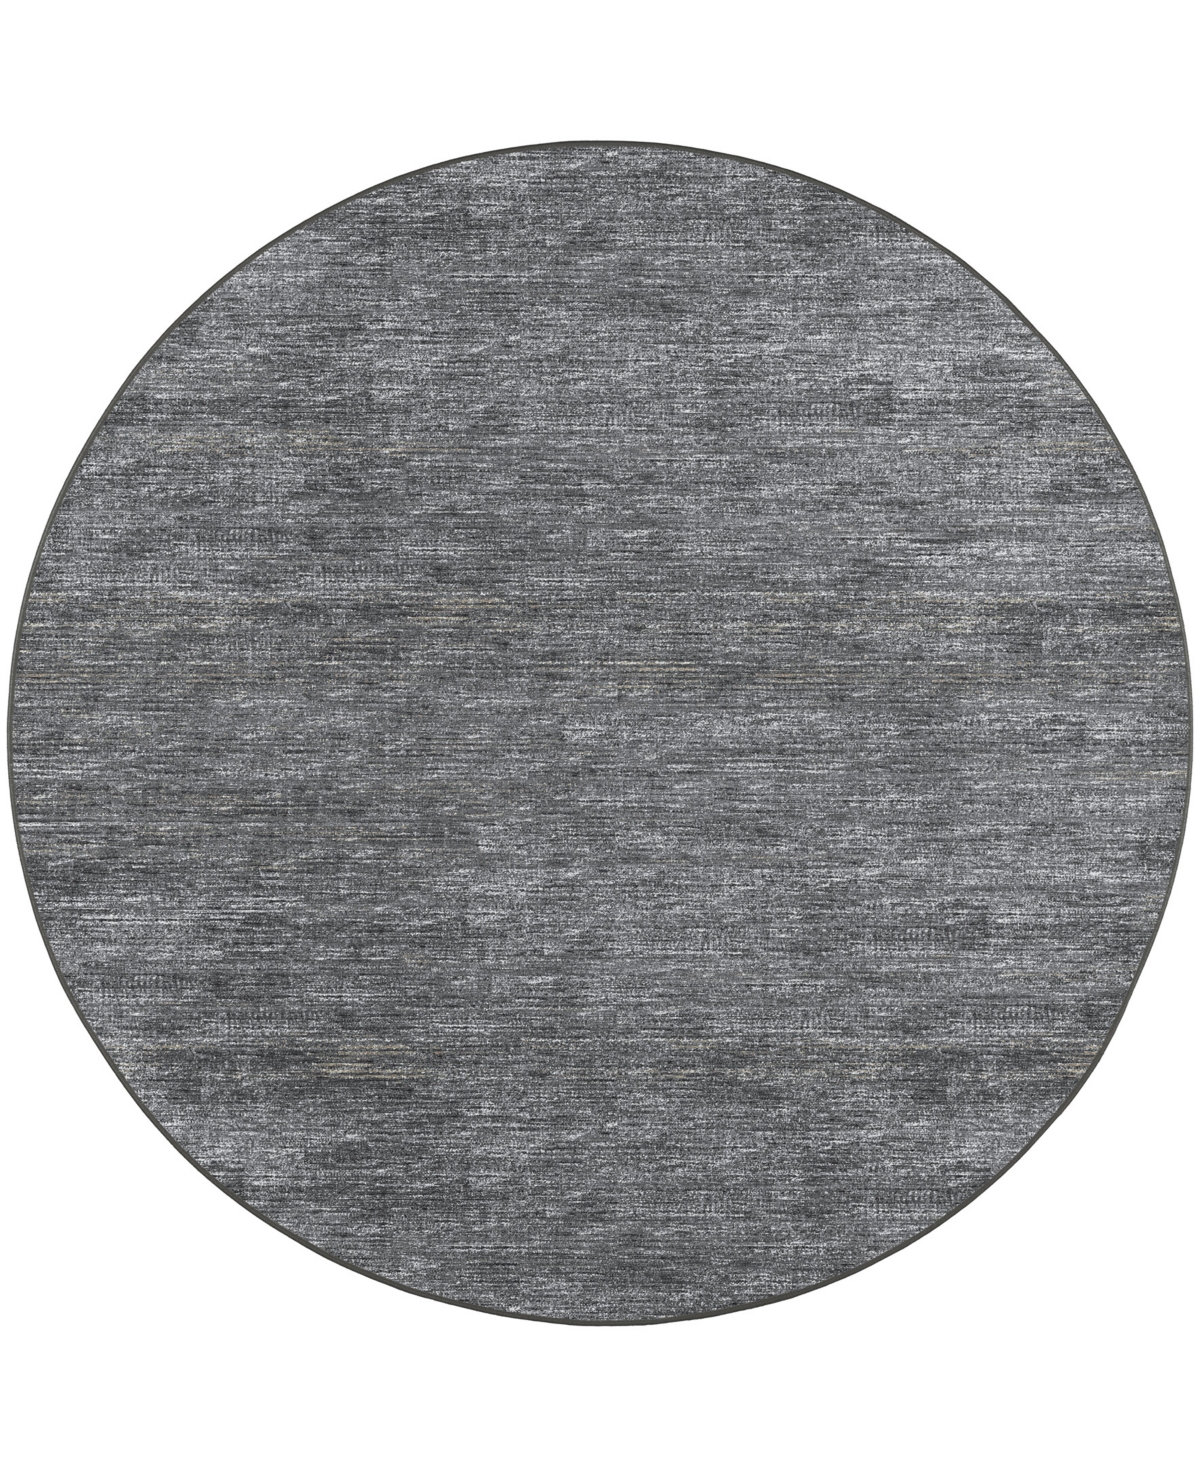 D Style Koda Kda-1 4' X 4' Round Area Rug In Charcoal